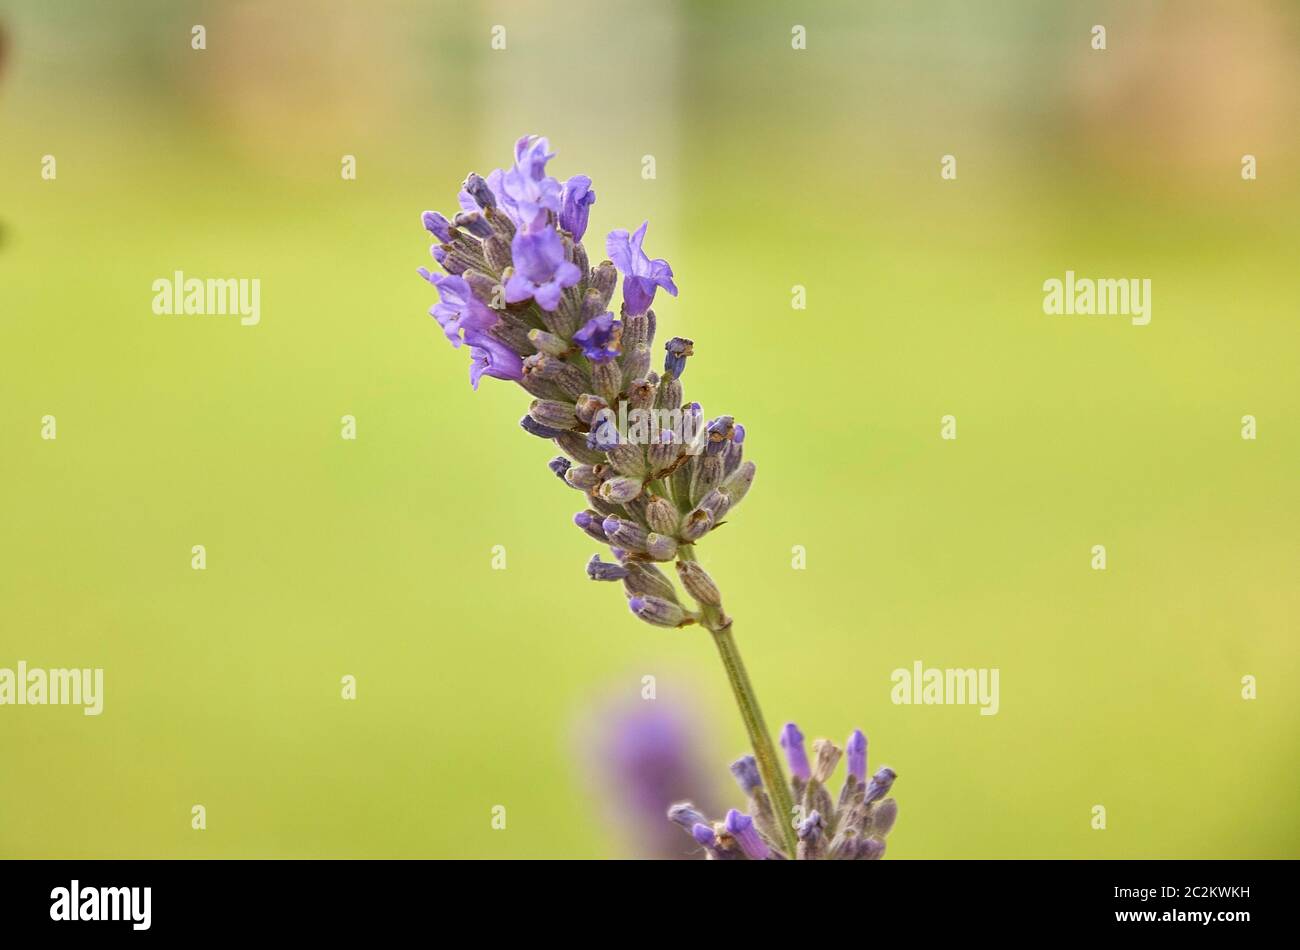 Detail of lavender plant flower with macro shot on yellow background. Stock Photo